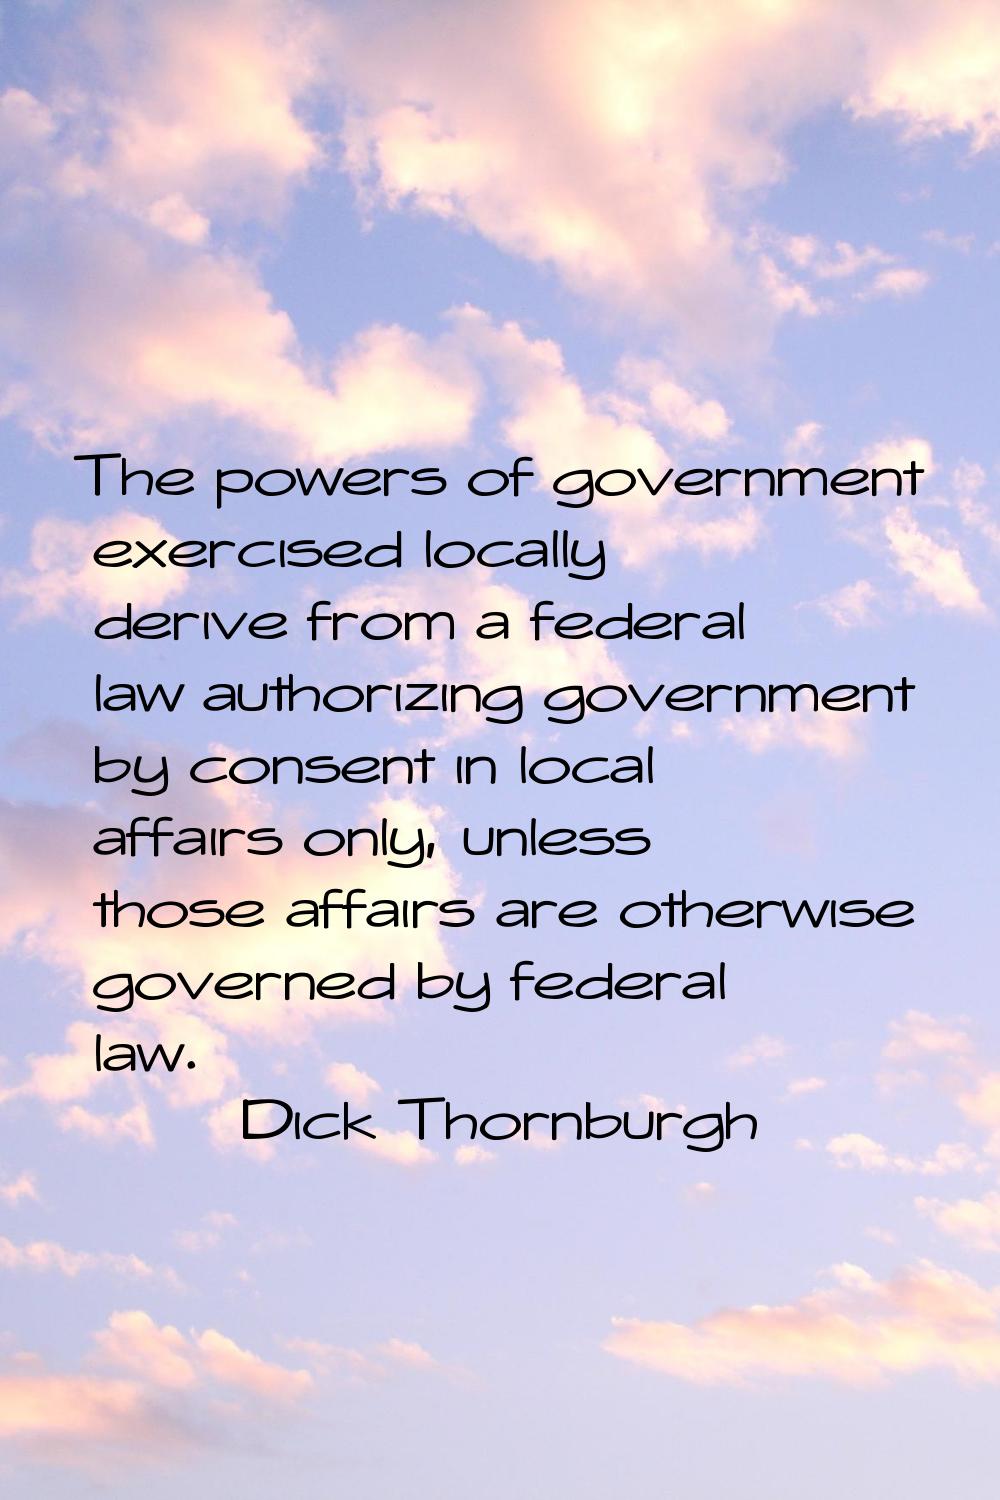 The powers of government exercised locally derive from a federal law authorizing government by cons